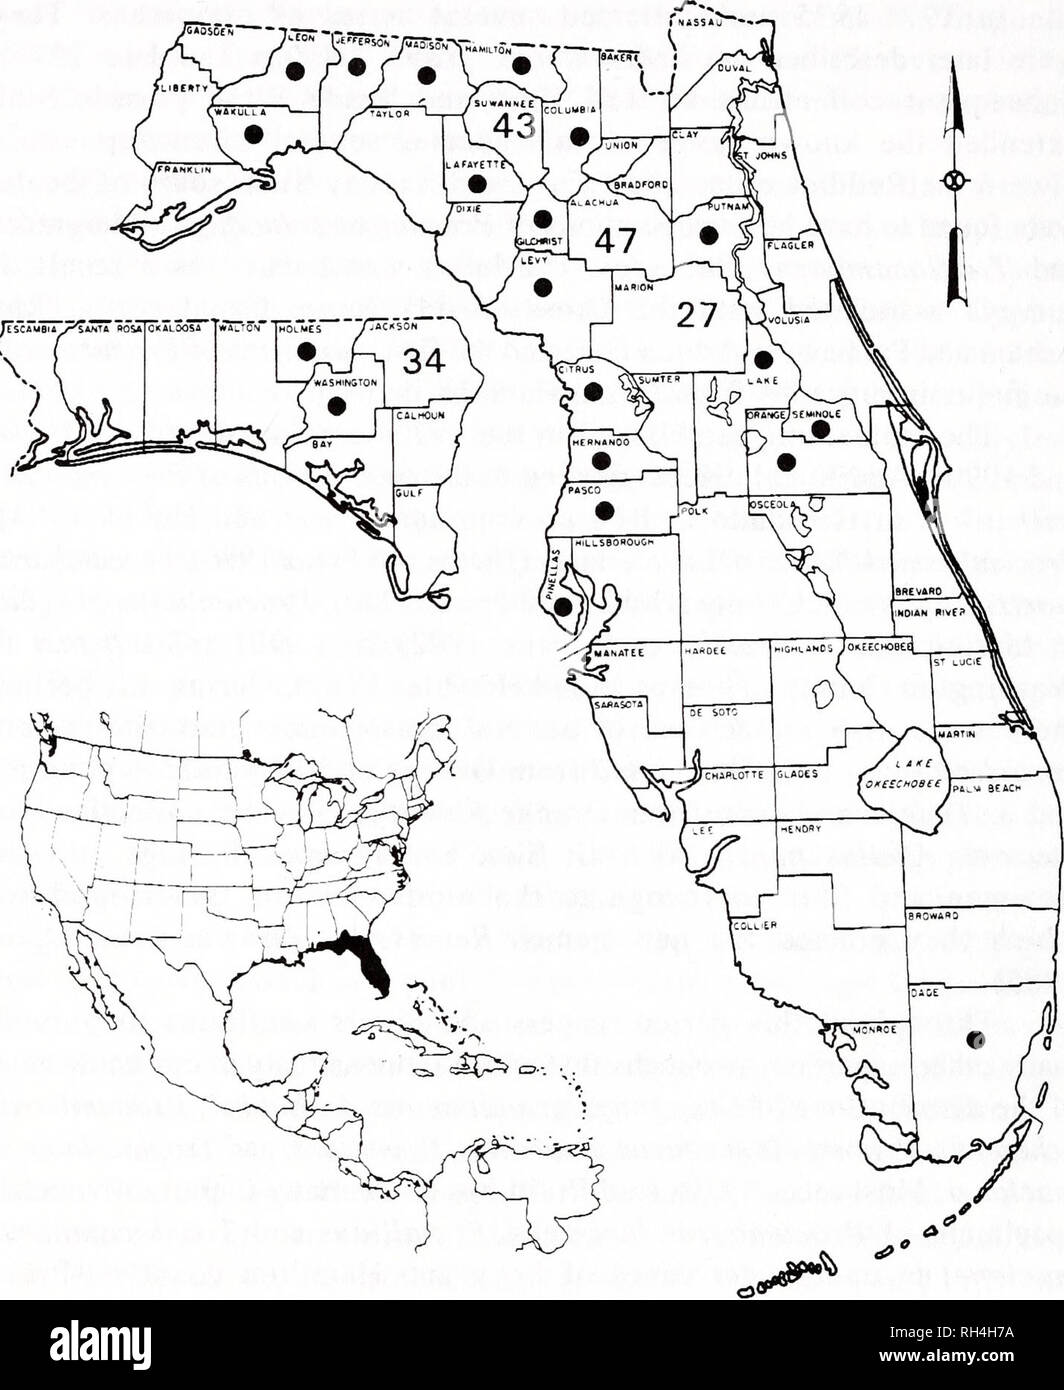 . Brimleyana. Zoology; Ecology; Natural history. 12 Richard Franz, Judy Bauer and Tom Morris. Fig. 1. Map of Florida showing county locations. Numbers of caves are shown for Alachua, Jackson, Marion, and Suwannee counties. Dots indicated other important cavernous counties. (3), Lake (2), Washington (2), Dade (2), Holmes (1), Jefferson (1), Pinellas (1), and Putnam (1) counties, Florida, and Decatur (1) and Doughtery (1) counties, Georgia. Caves theoretically could exist anywhere in Florida and south Georgia since most of this region is underlain with extensive beds of Oligocene and Eocene lime Stock Photo